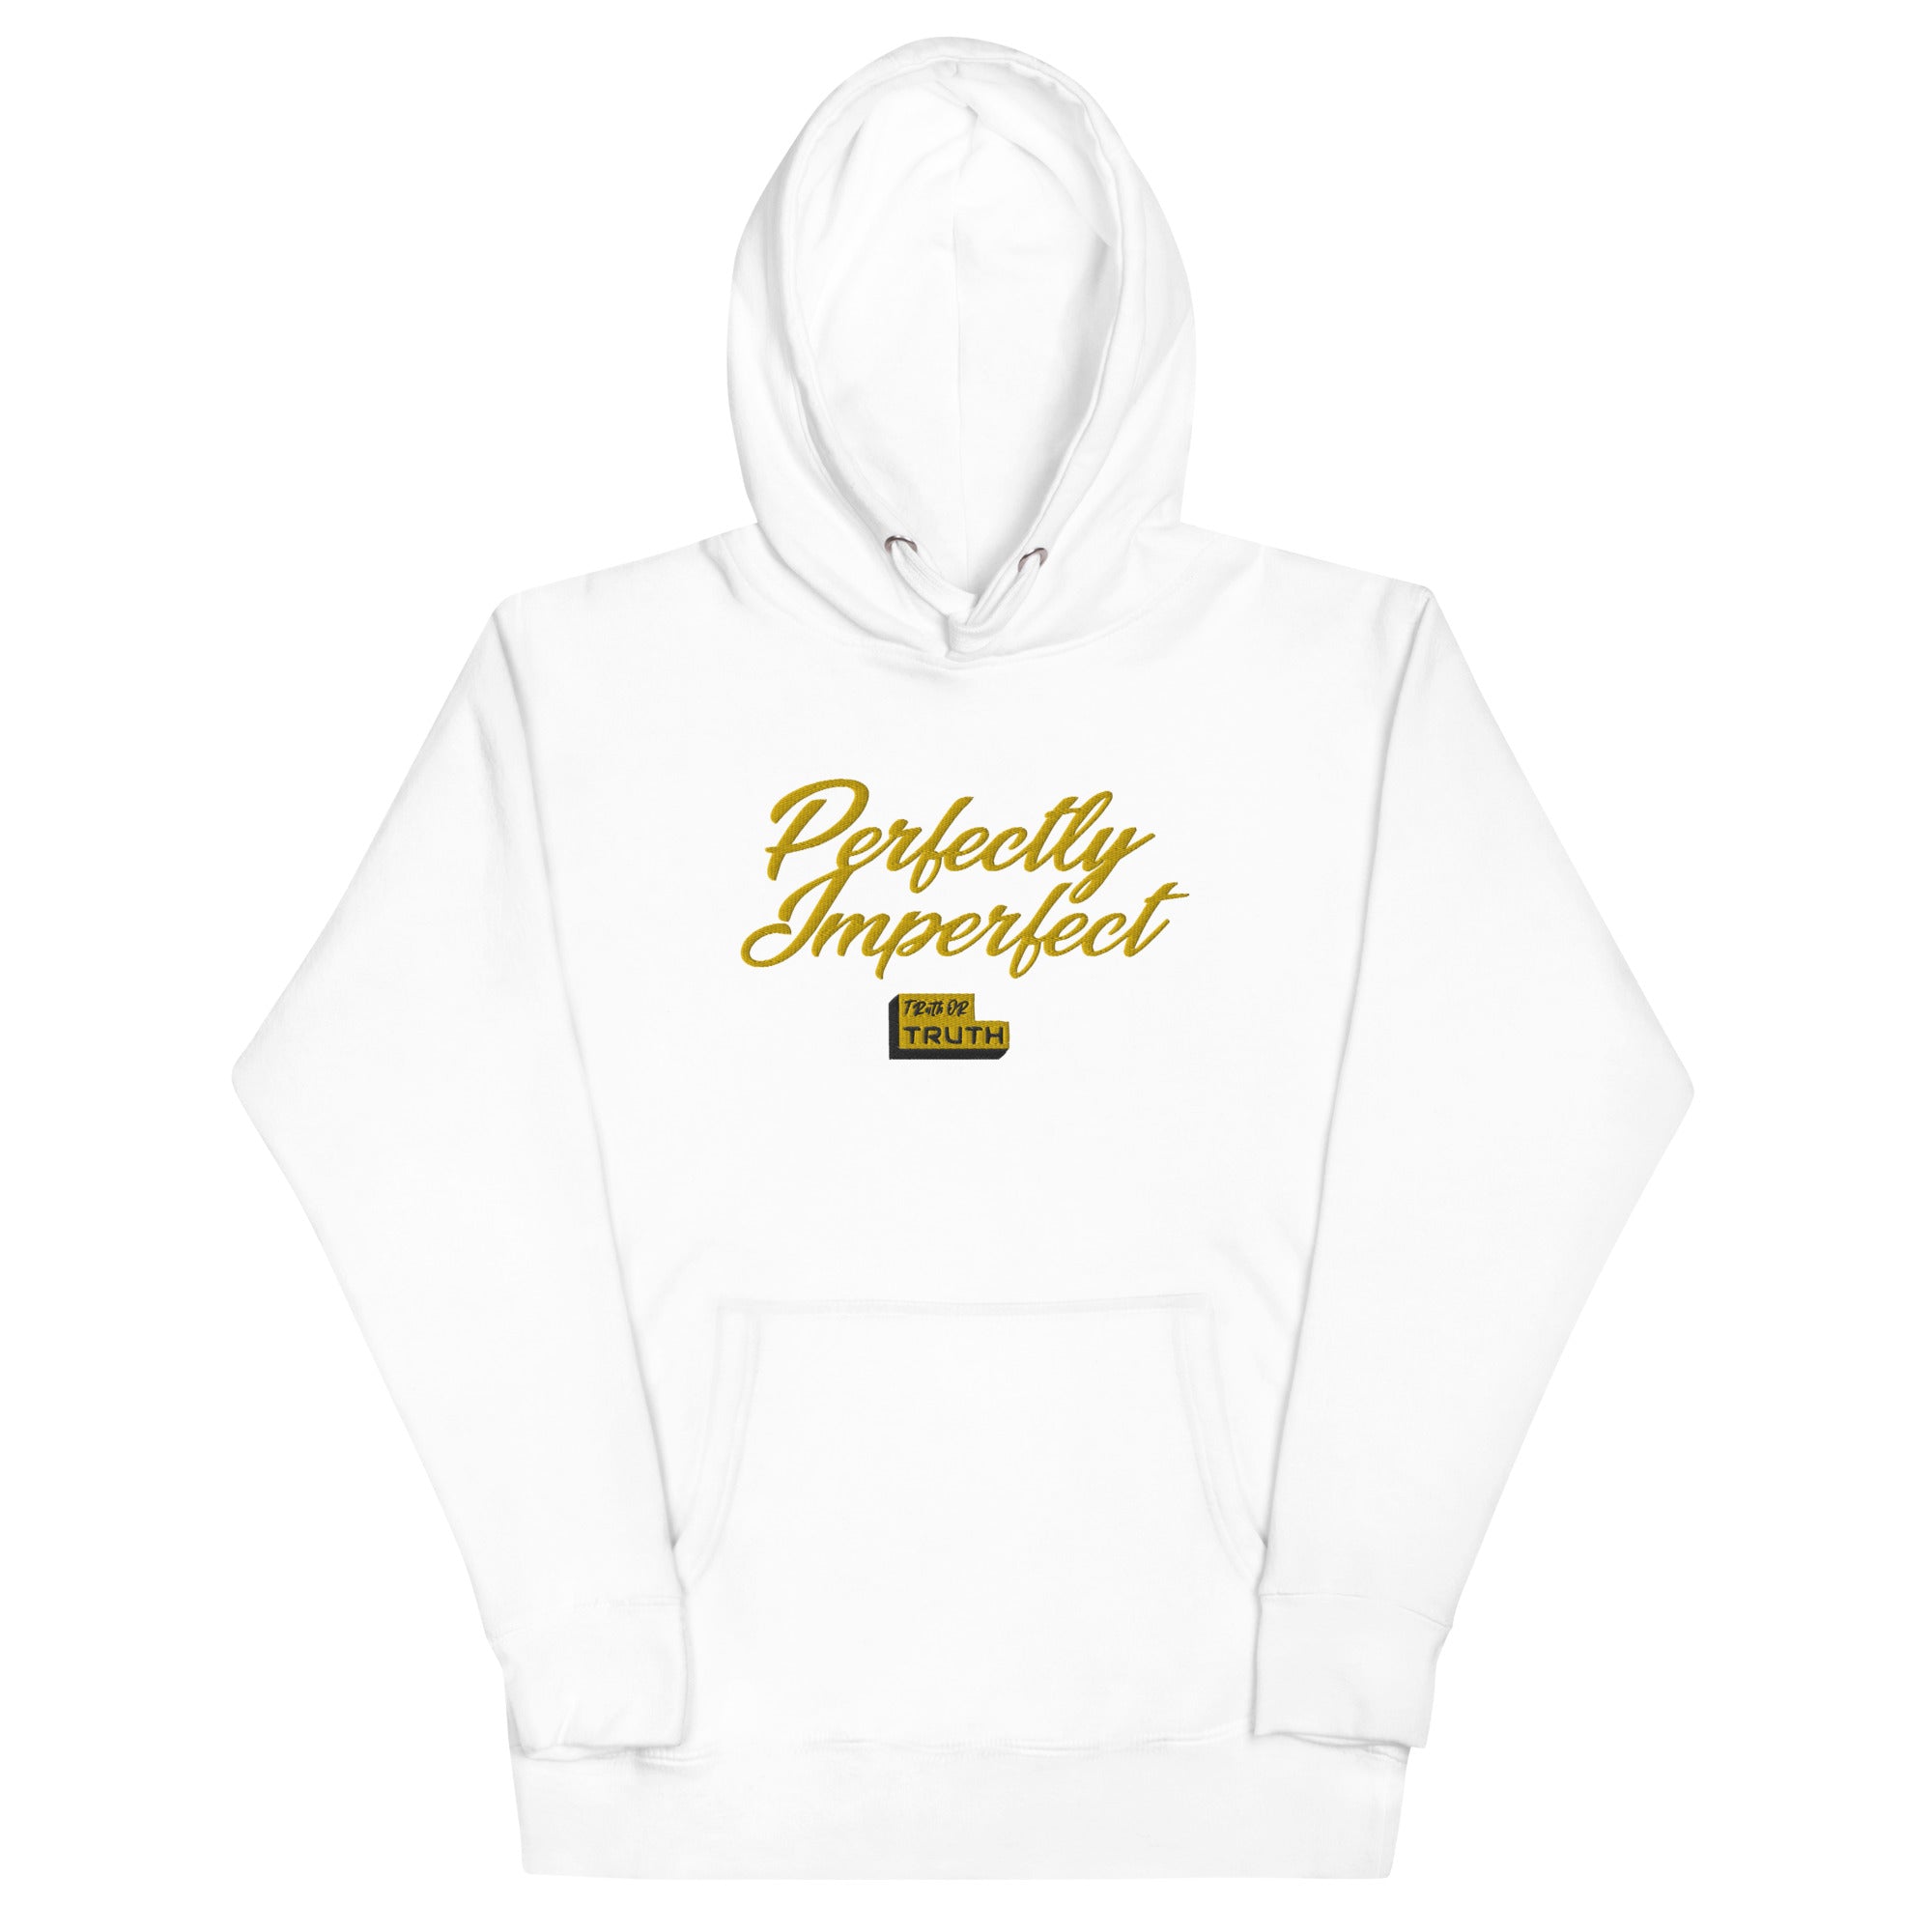 Perfectly Imperfect Unisex Hoodie